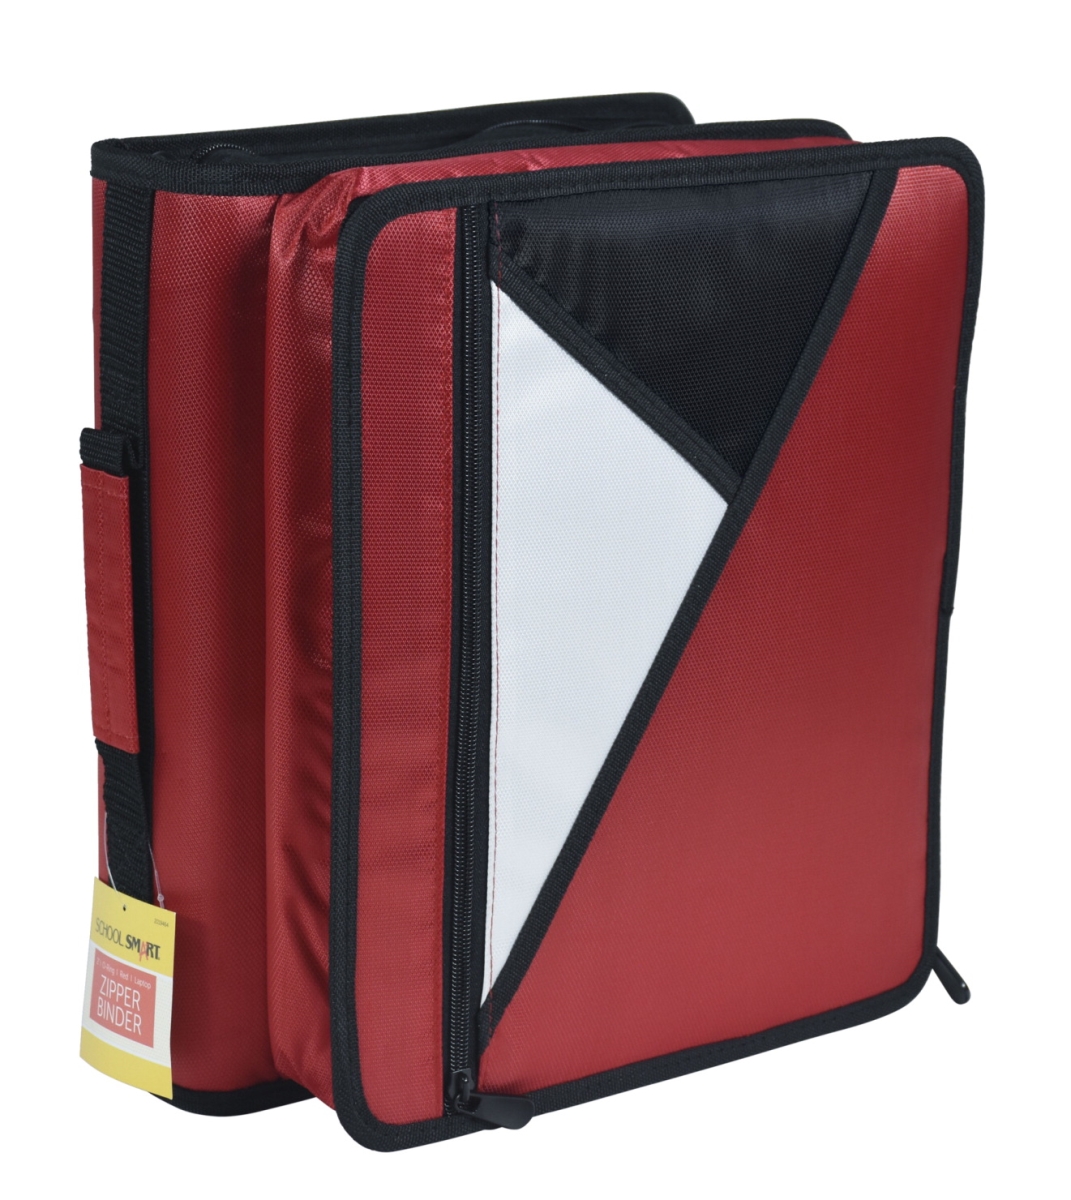 2019464 2 In. Round Ring Zipper Binder With Laptop Compartment, Red